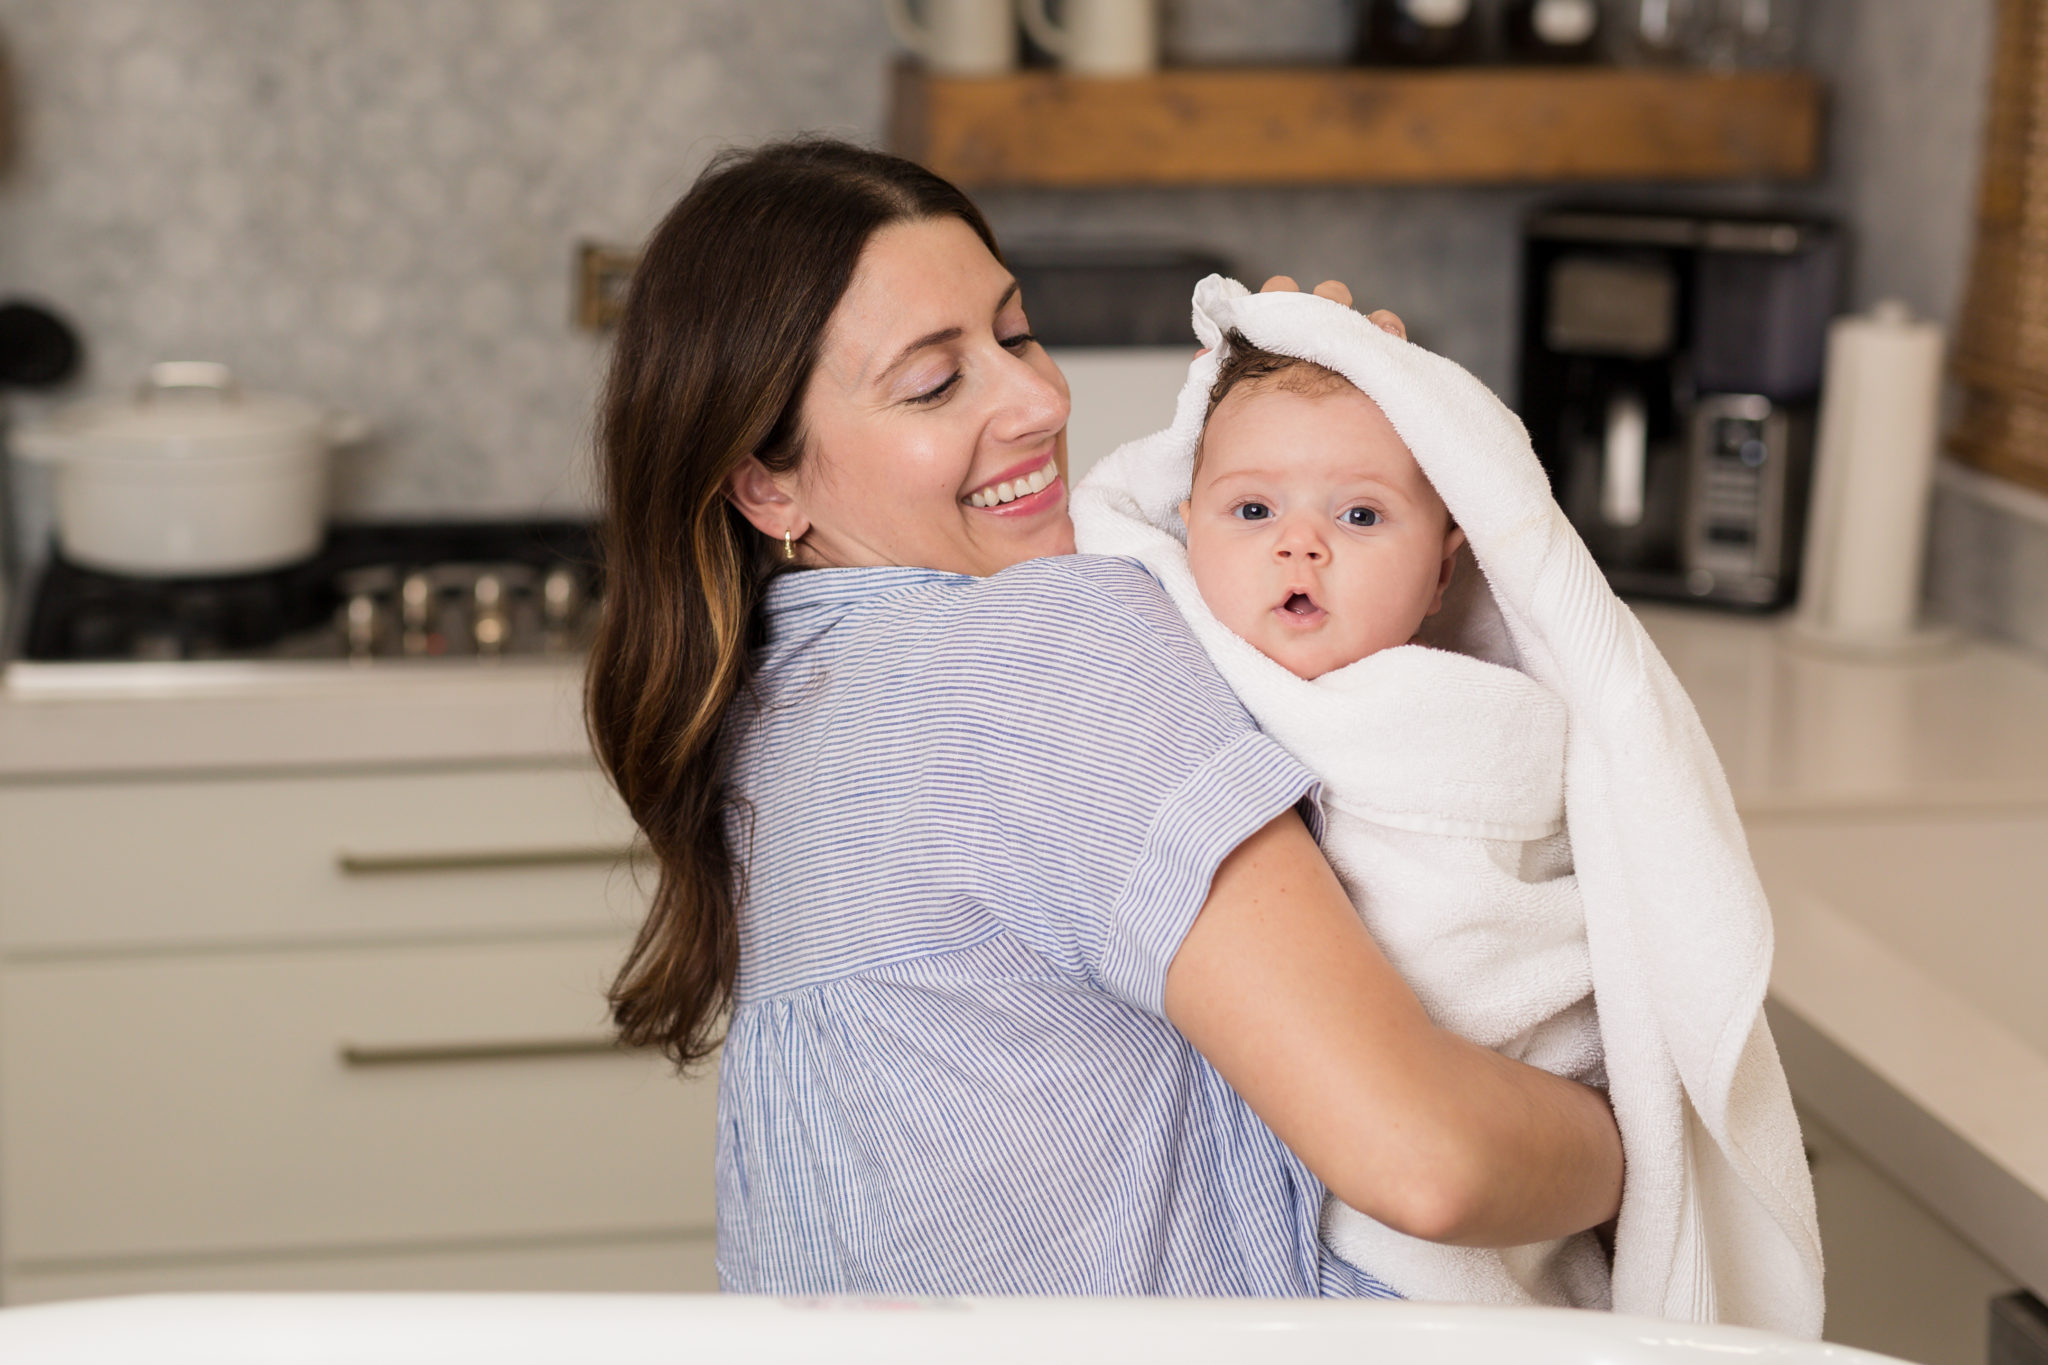 I’ve partnered with Baby Dove to share a few tips on how to make baby’s first bath special! Mamas, do you remember your baby’s first bath? #DovePartner #BabyDoveLove